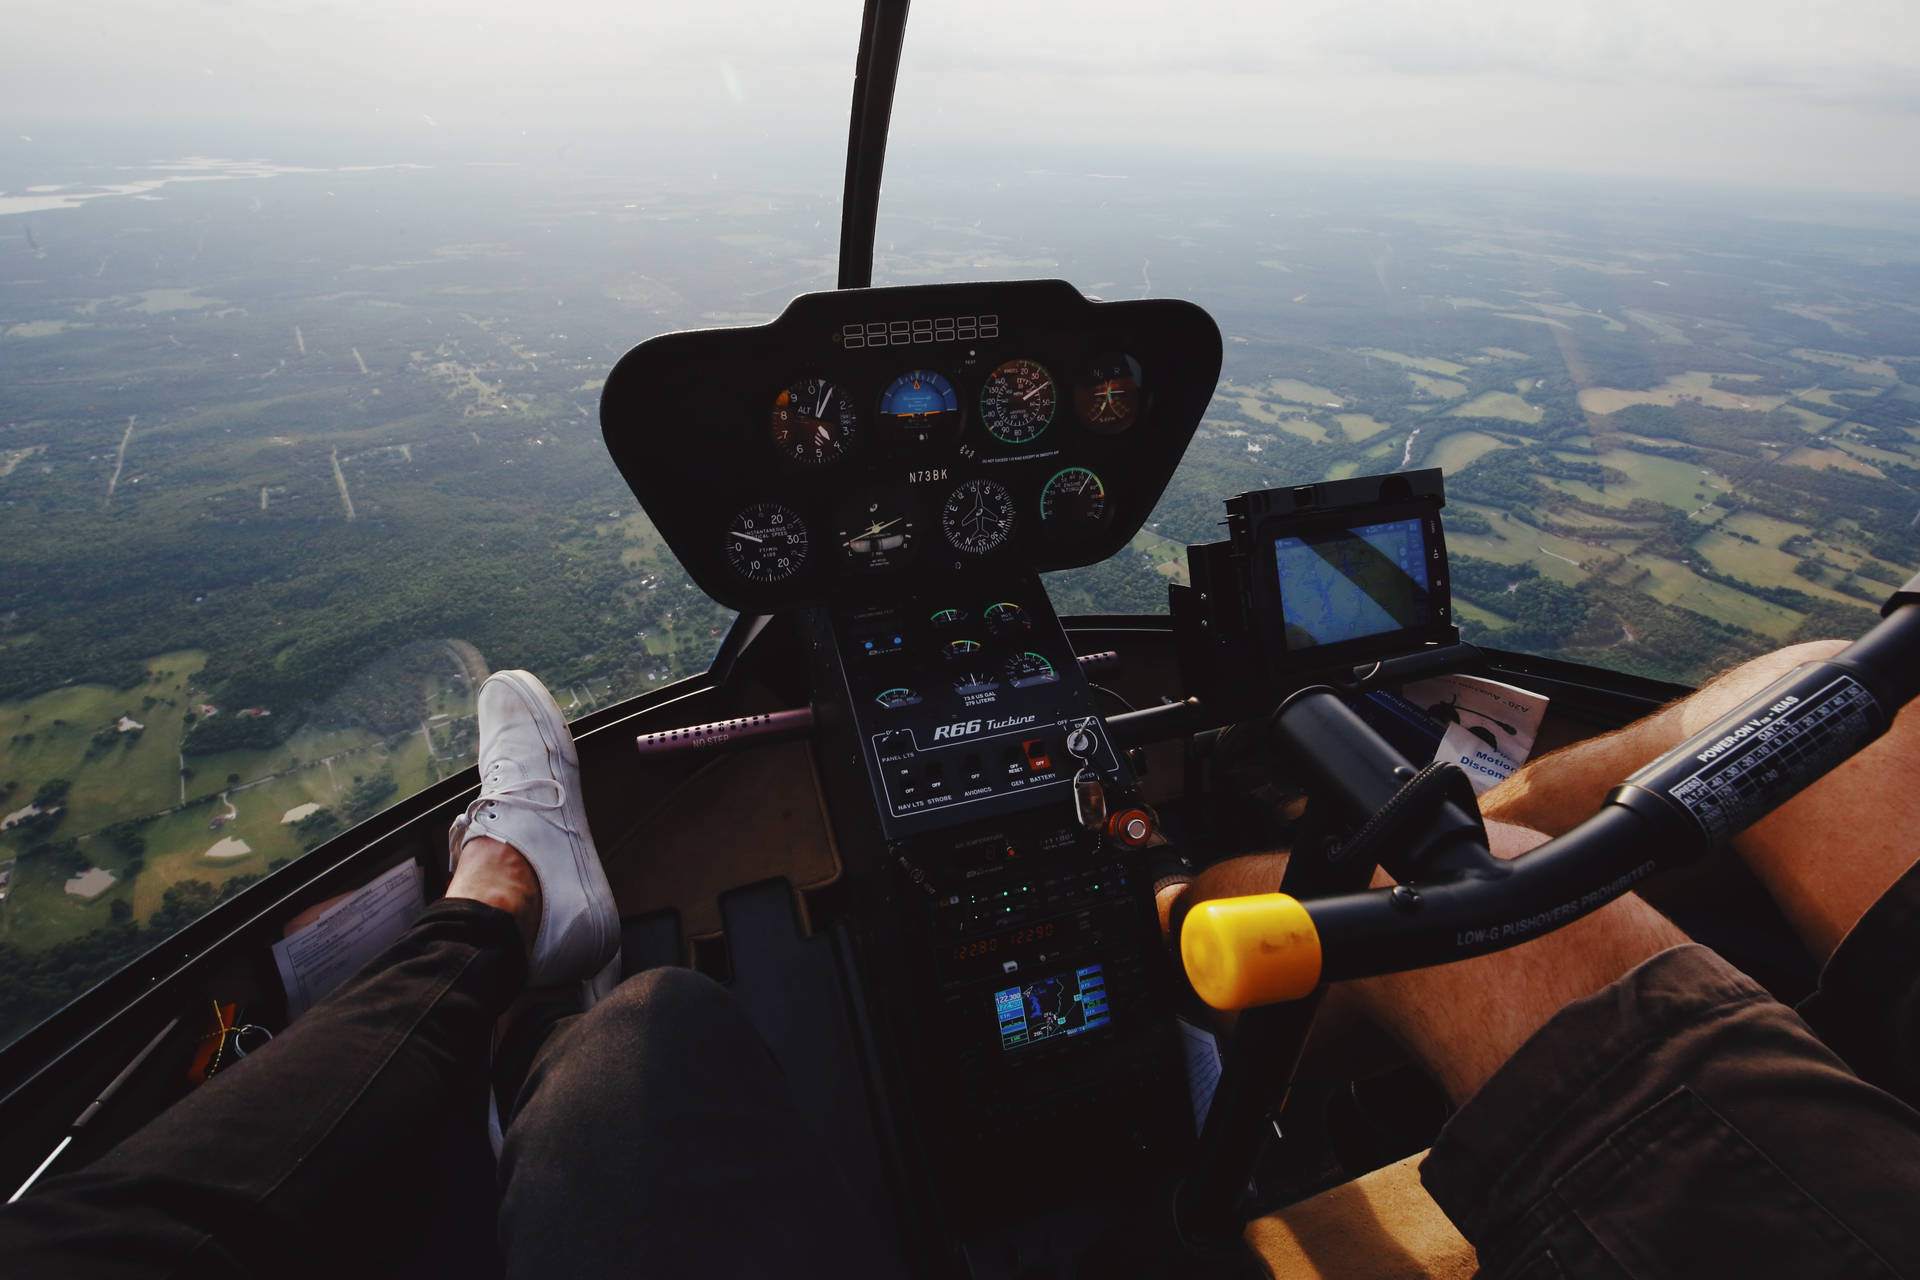 Helicopter Cockpit Country View Wallpaper